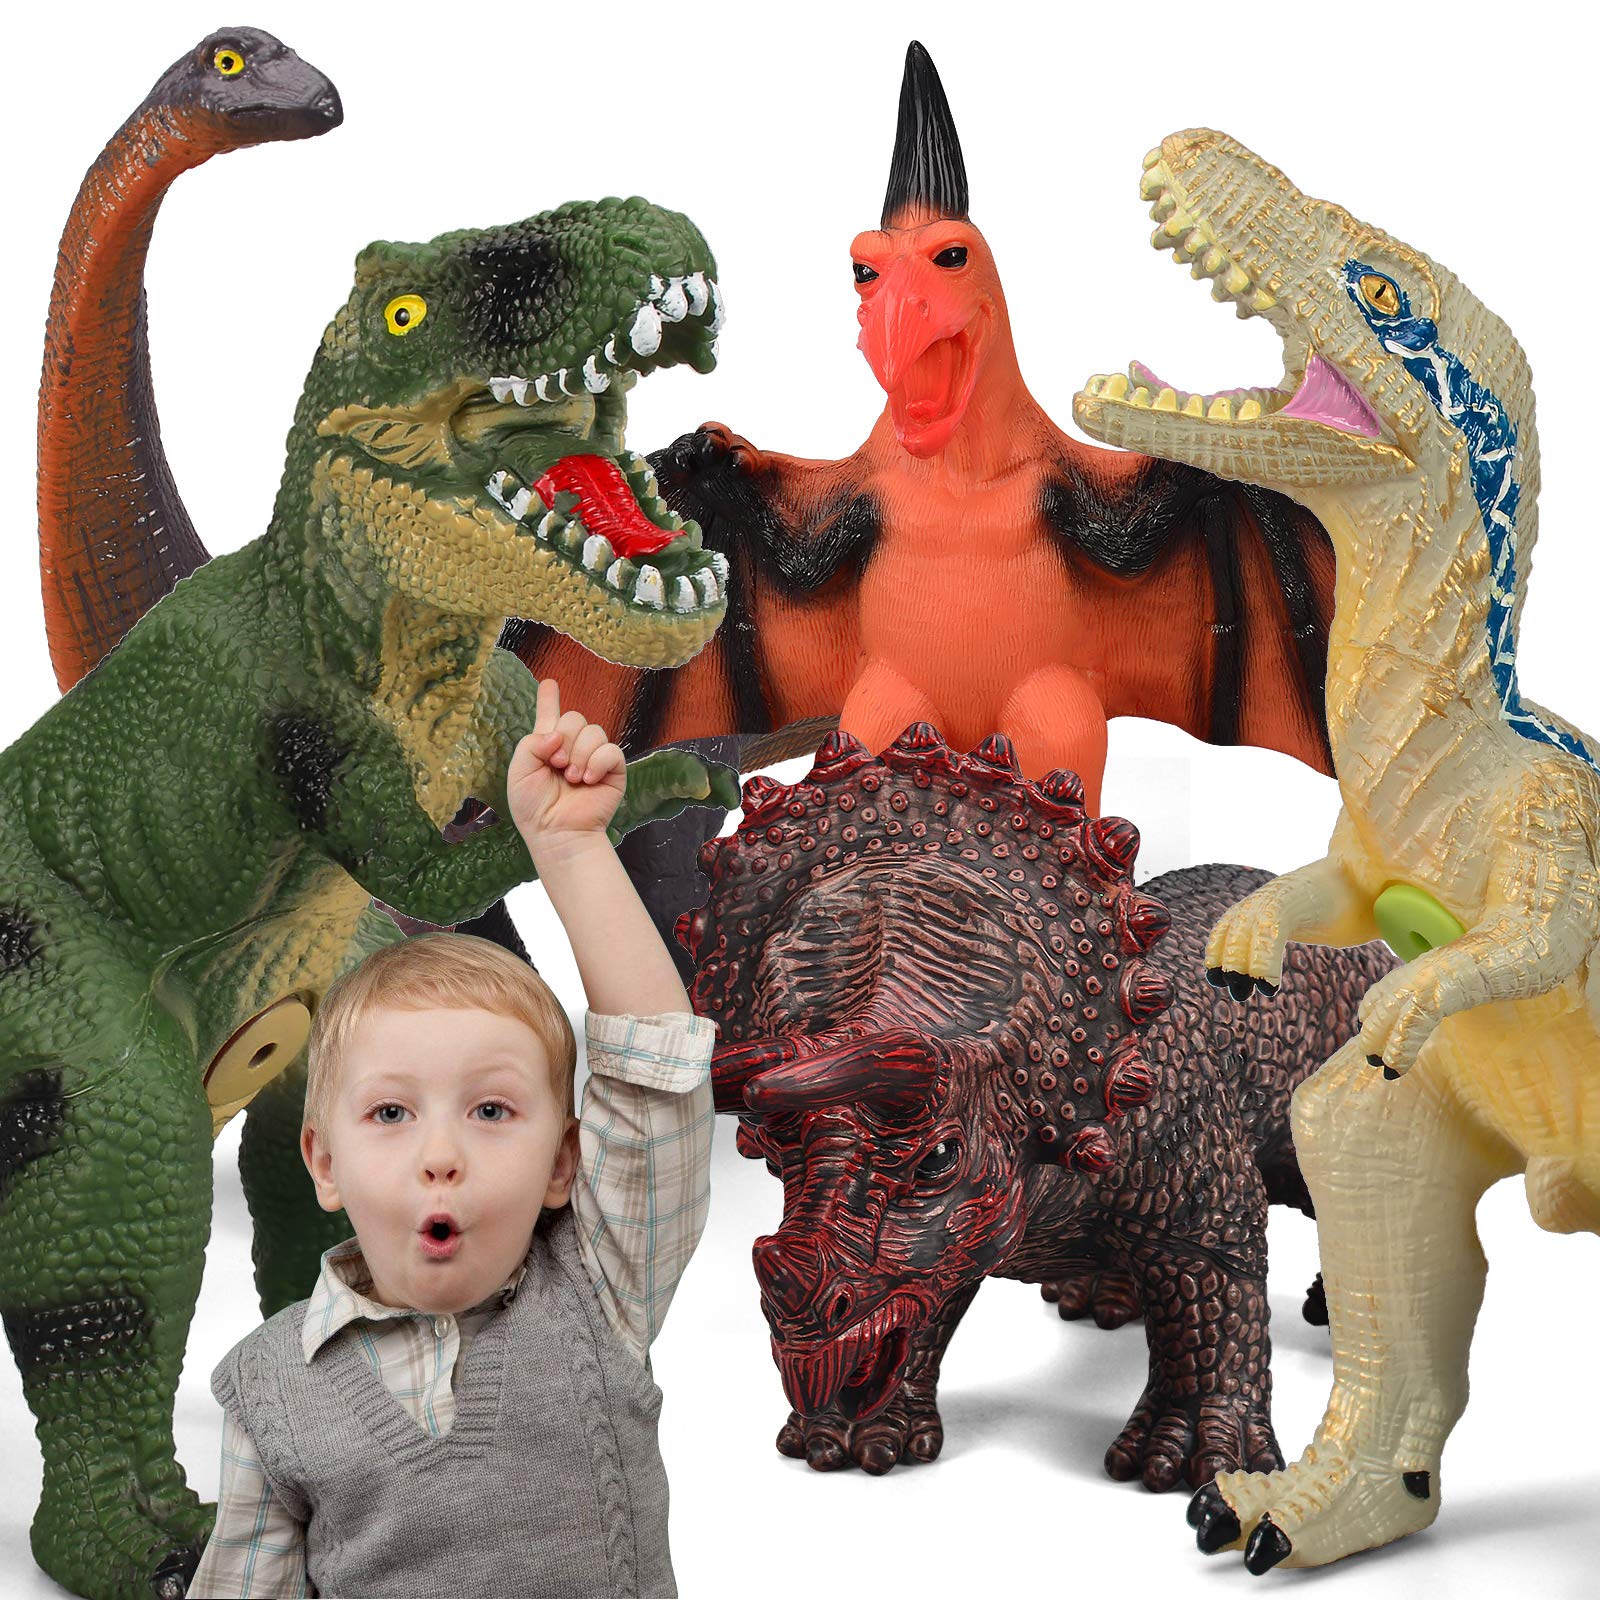 6 Piece Dinosaur Toys for Kids and Toddlers, Blue Velociraptor T-Rex Triceratops, Large Soft Dinosaur Toys Set for Dinosaur Lovers - Perfect Dinosaur Party Favors, Birthday Gifts